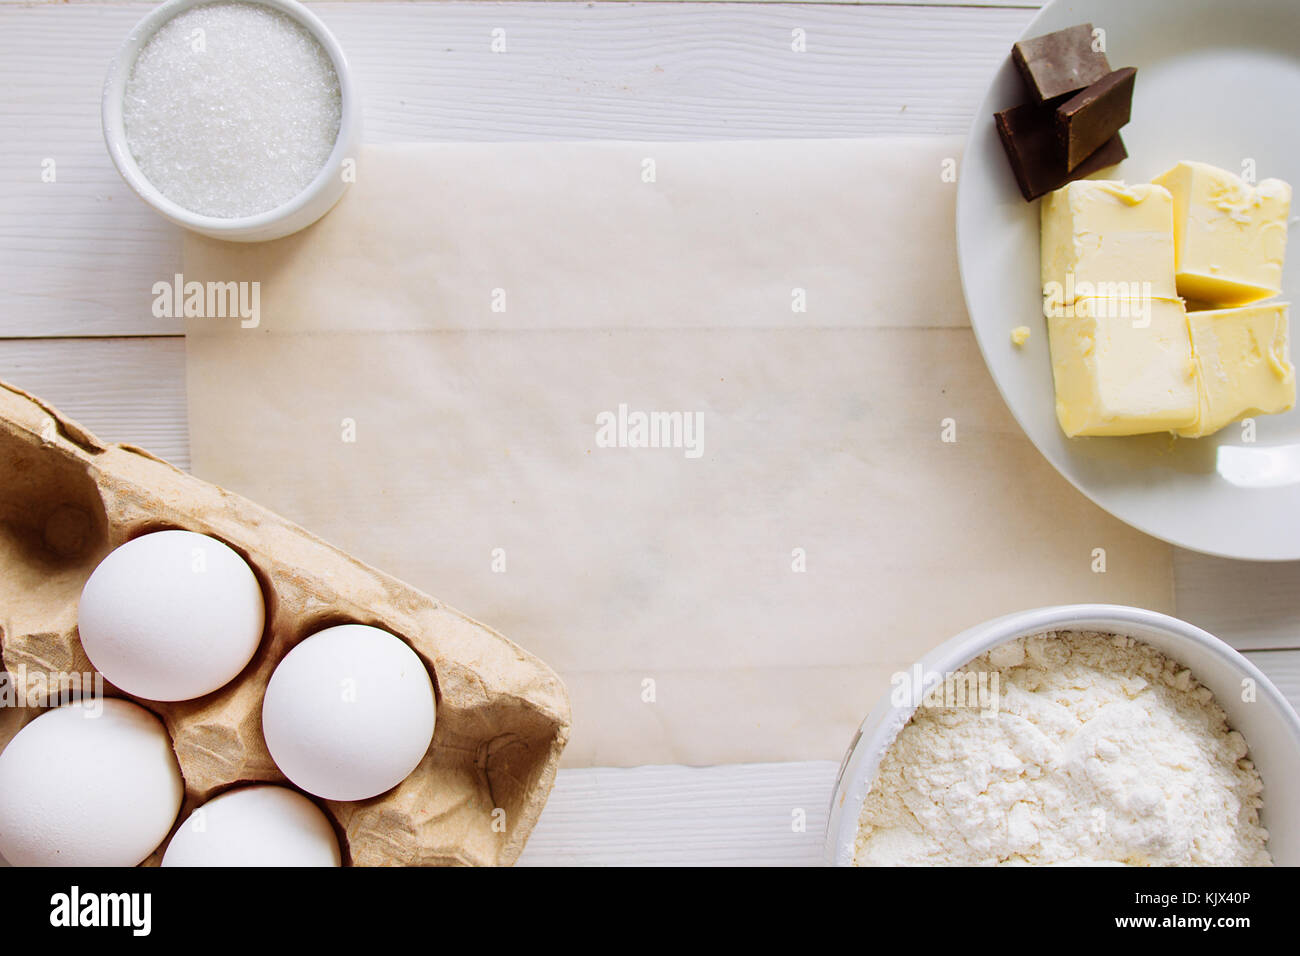 Eggs, butter, flour and cooking paper copy space selective focus Stock Photo